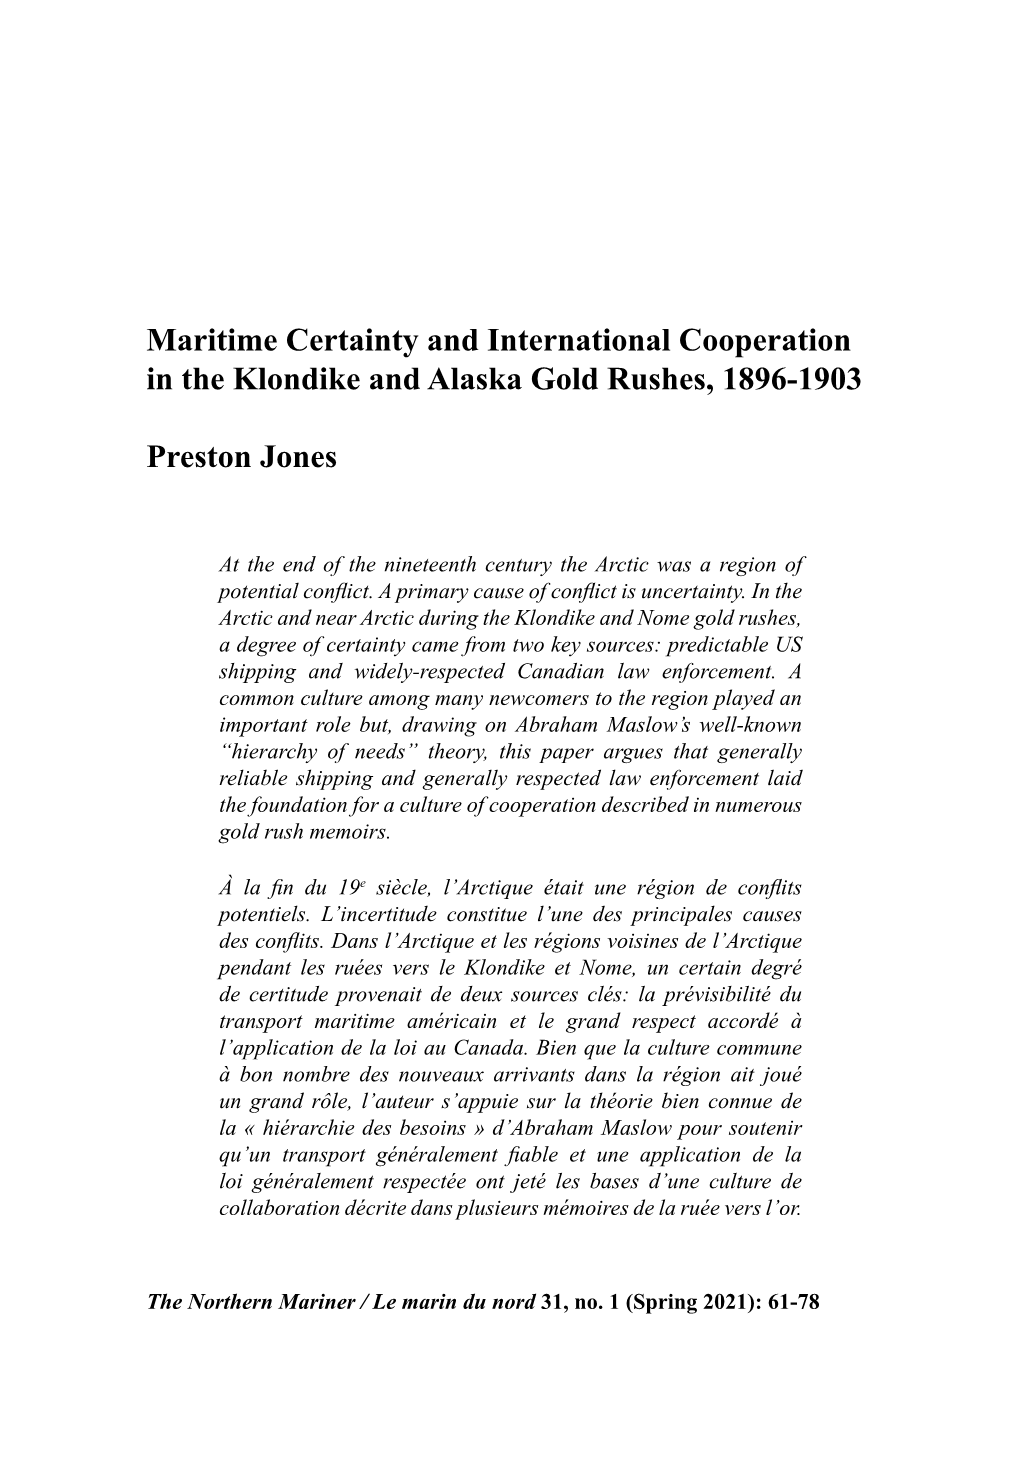 Maritime Certainty and International Cooperation in the Klondike and Alaska Gold Rushes, 1896-1903